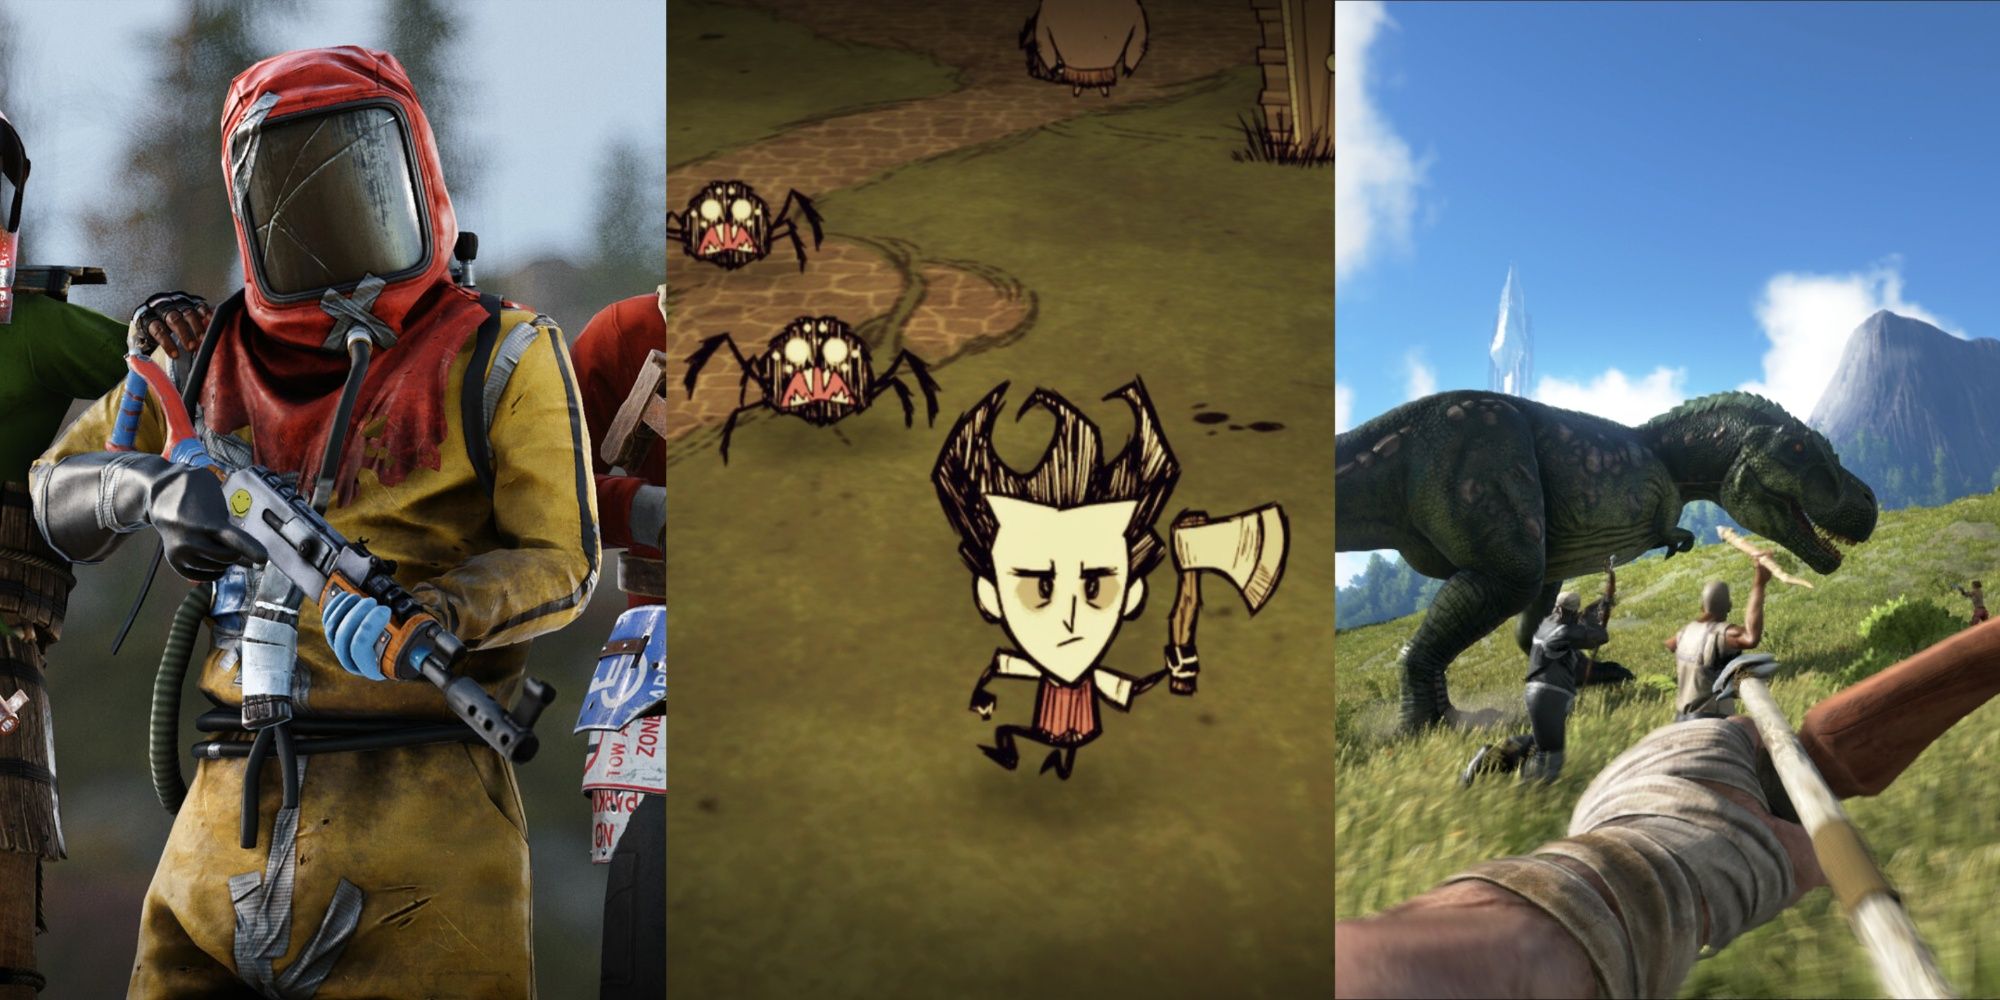 Collage Image of Don't Starve, Ark, and DayZ.